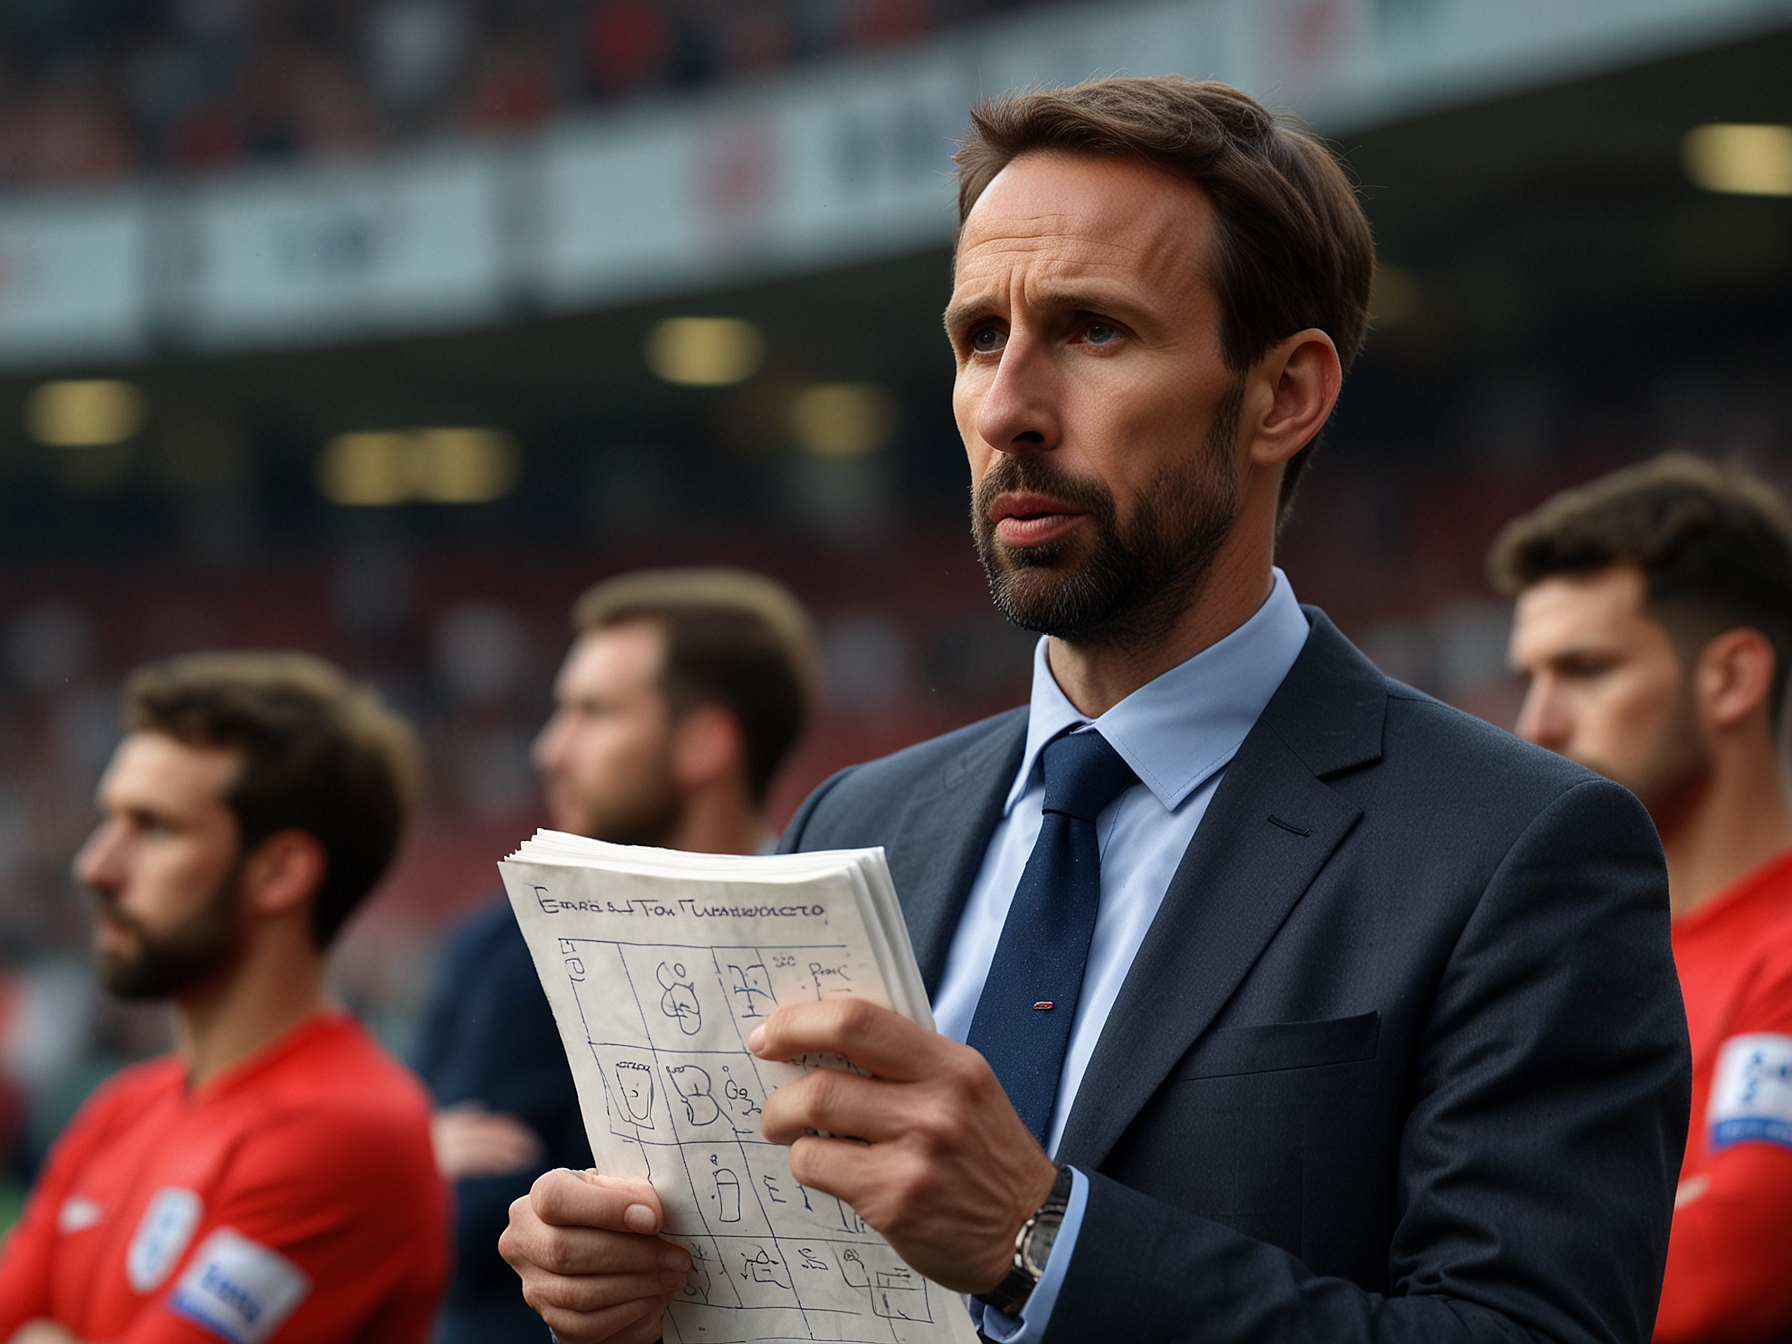 Gareth Southgate on the sidelines during an England match, contemplating team strategy while holding a notepad, capturing the essence of managerial decision-making.